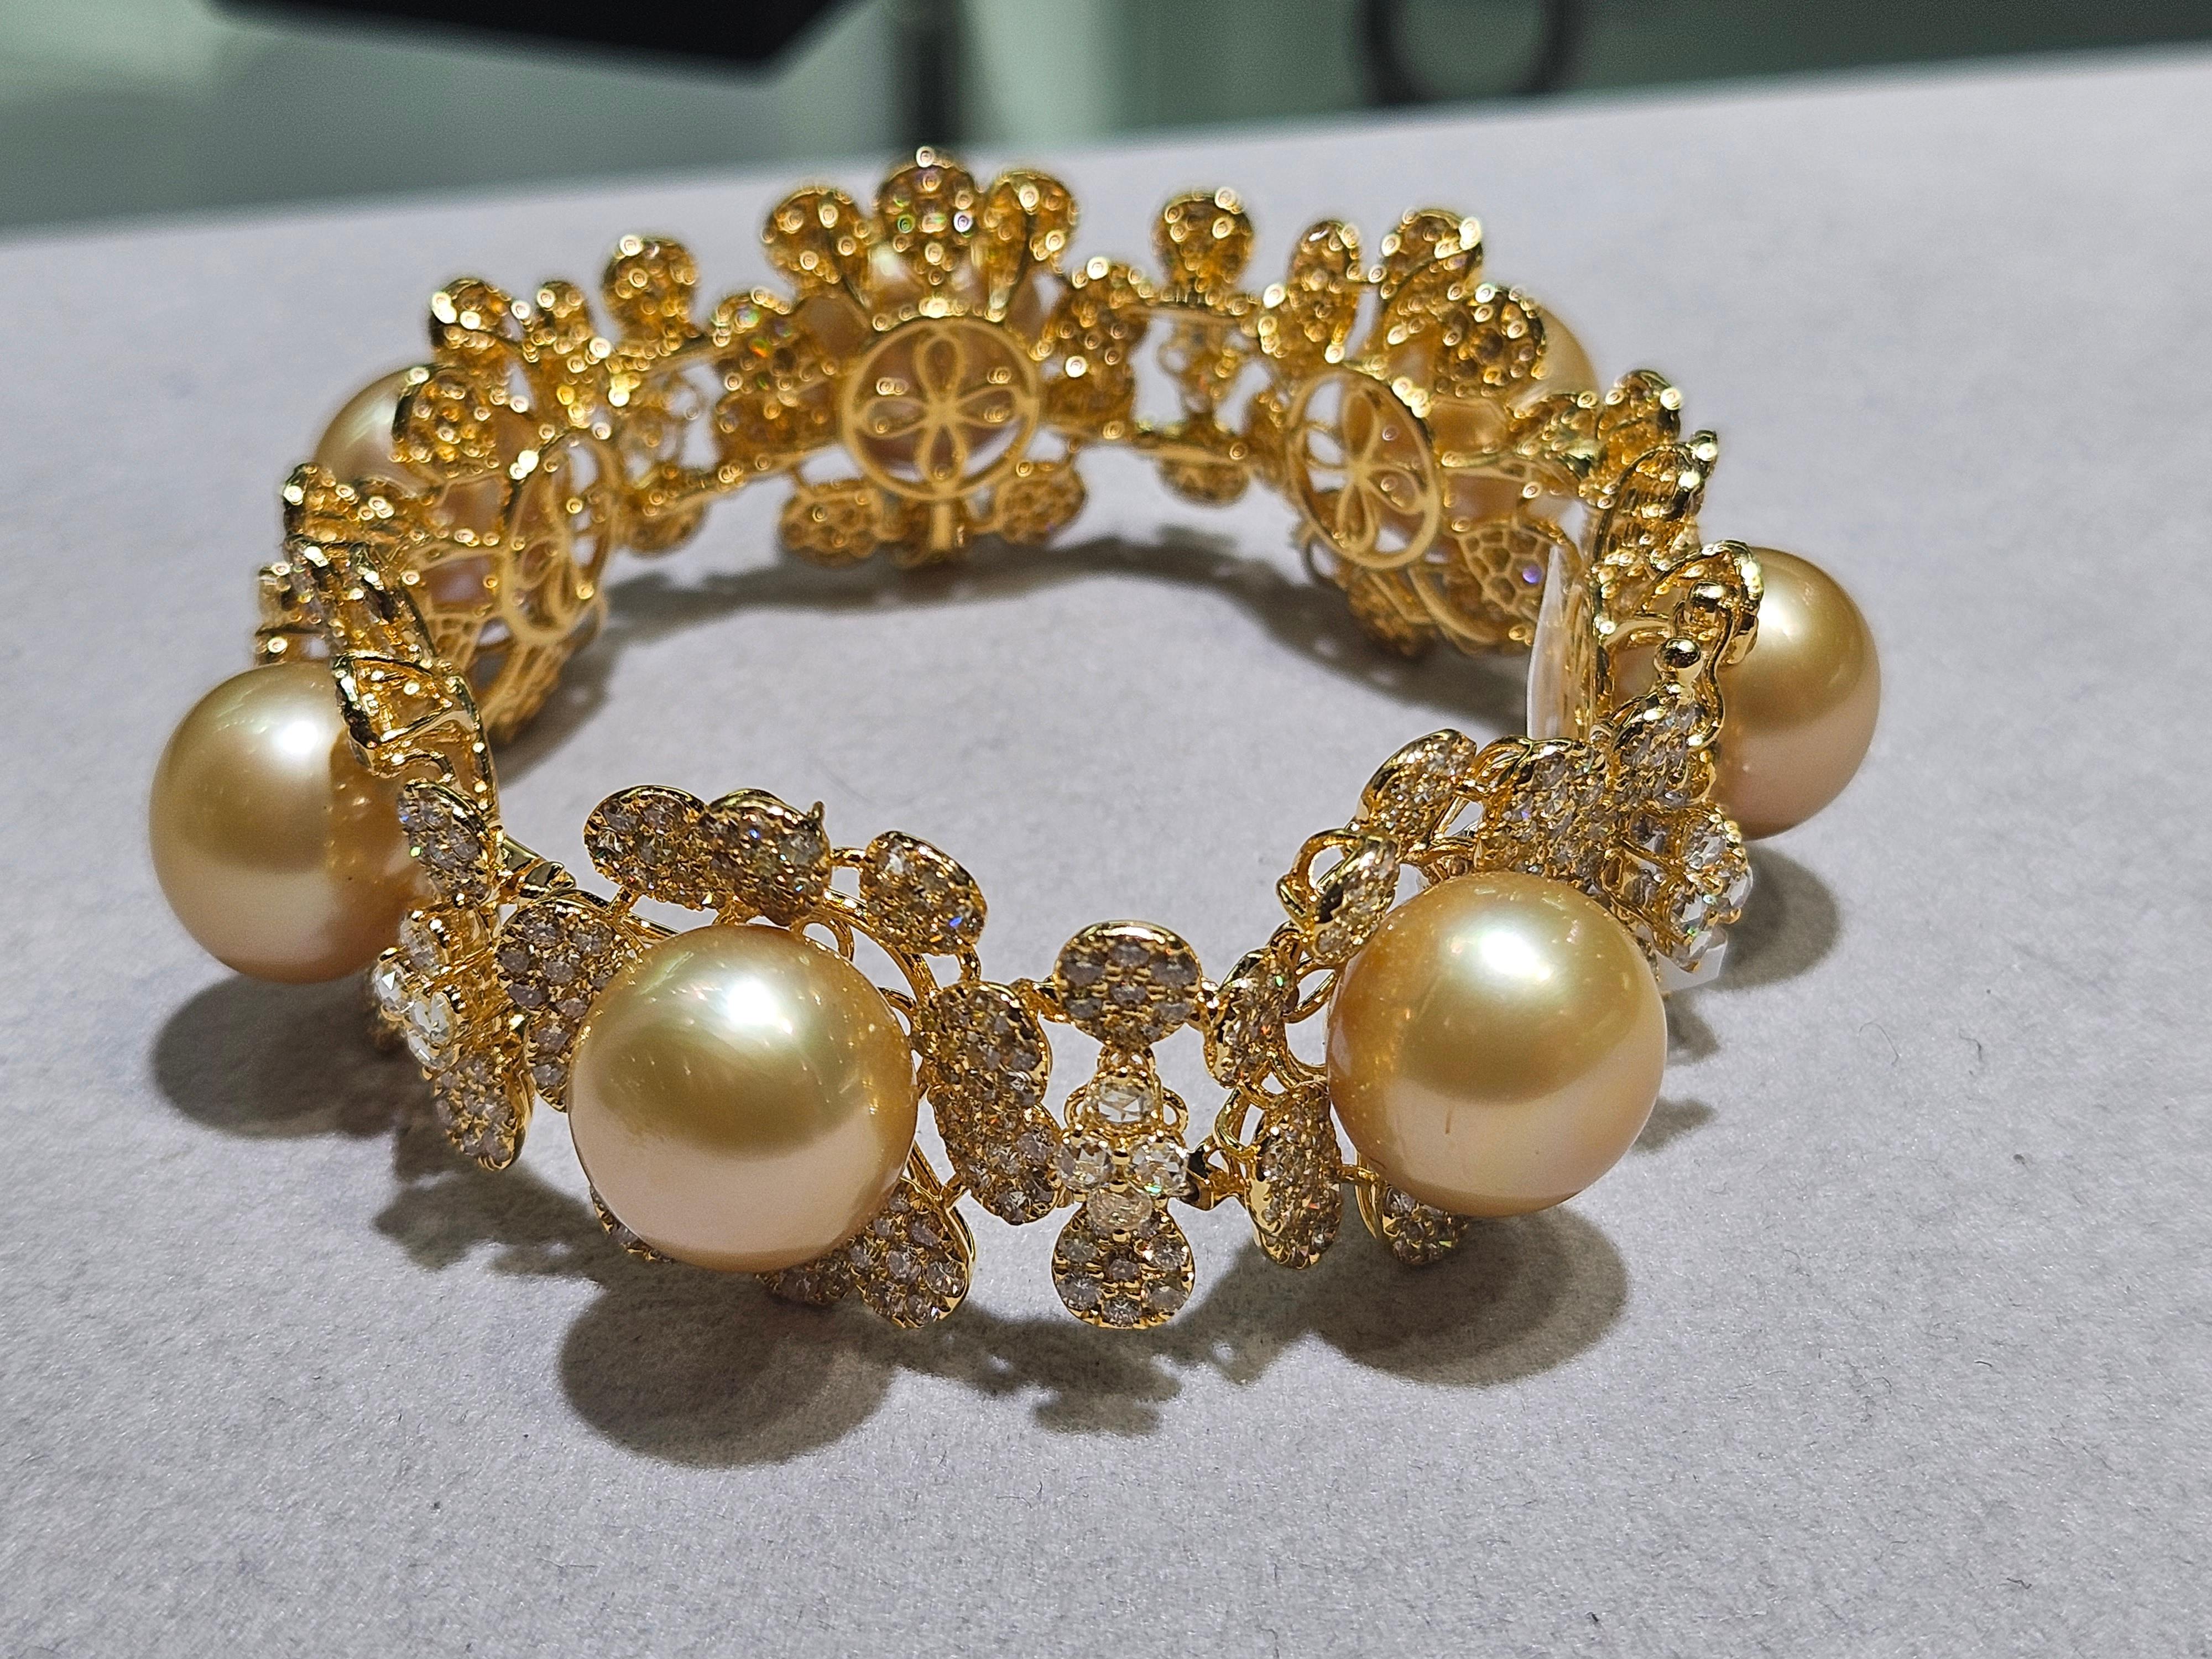 The Following Item we are offering is this Beautiful Rare Important 18KT Gold Fancy Large Golden Pearl and Fancy Rose Yellow Diamond Bracelet. Bracelet  is comprised of 7 Beautiful Magnificent High Luster Large AA-AAA GOLDEN PRISTINE SOUTH SEA